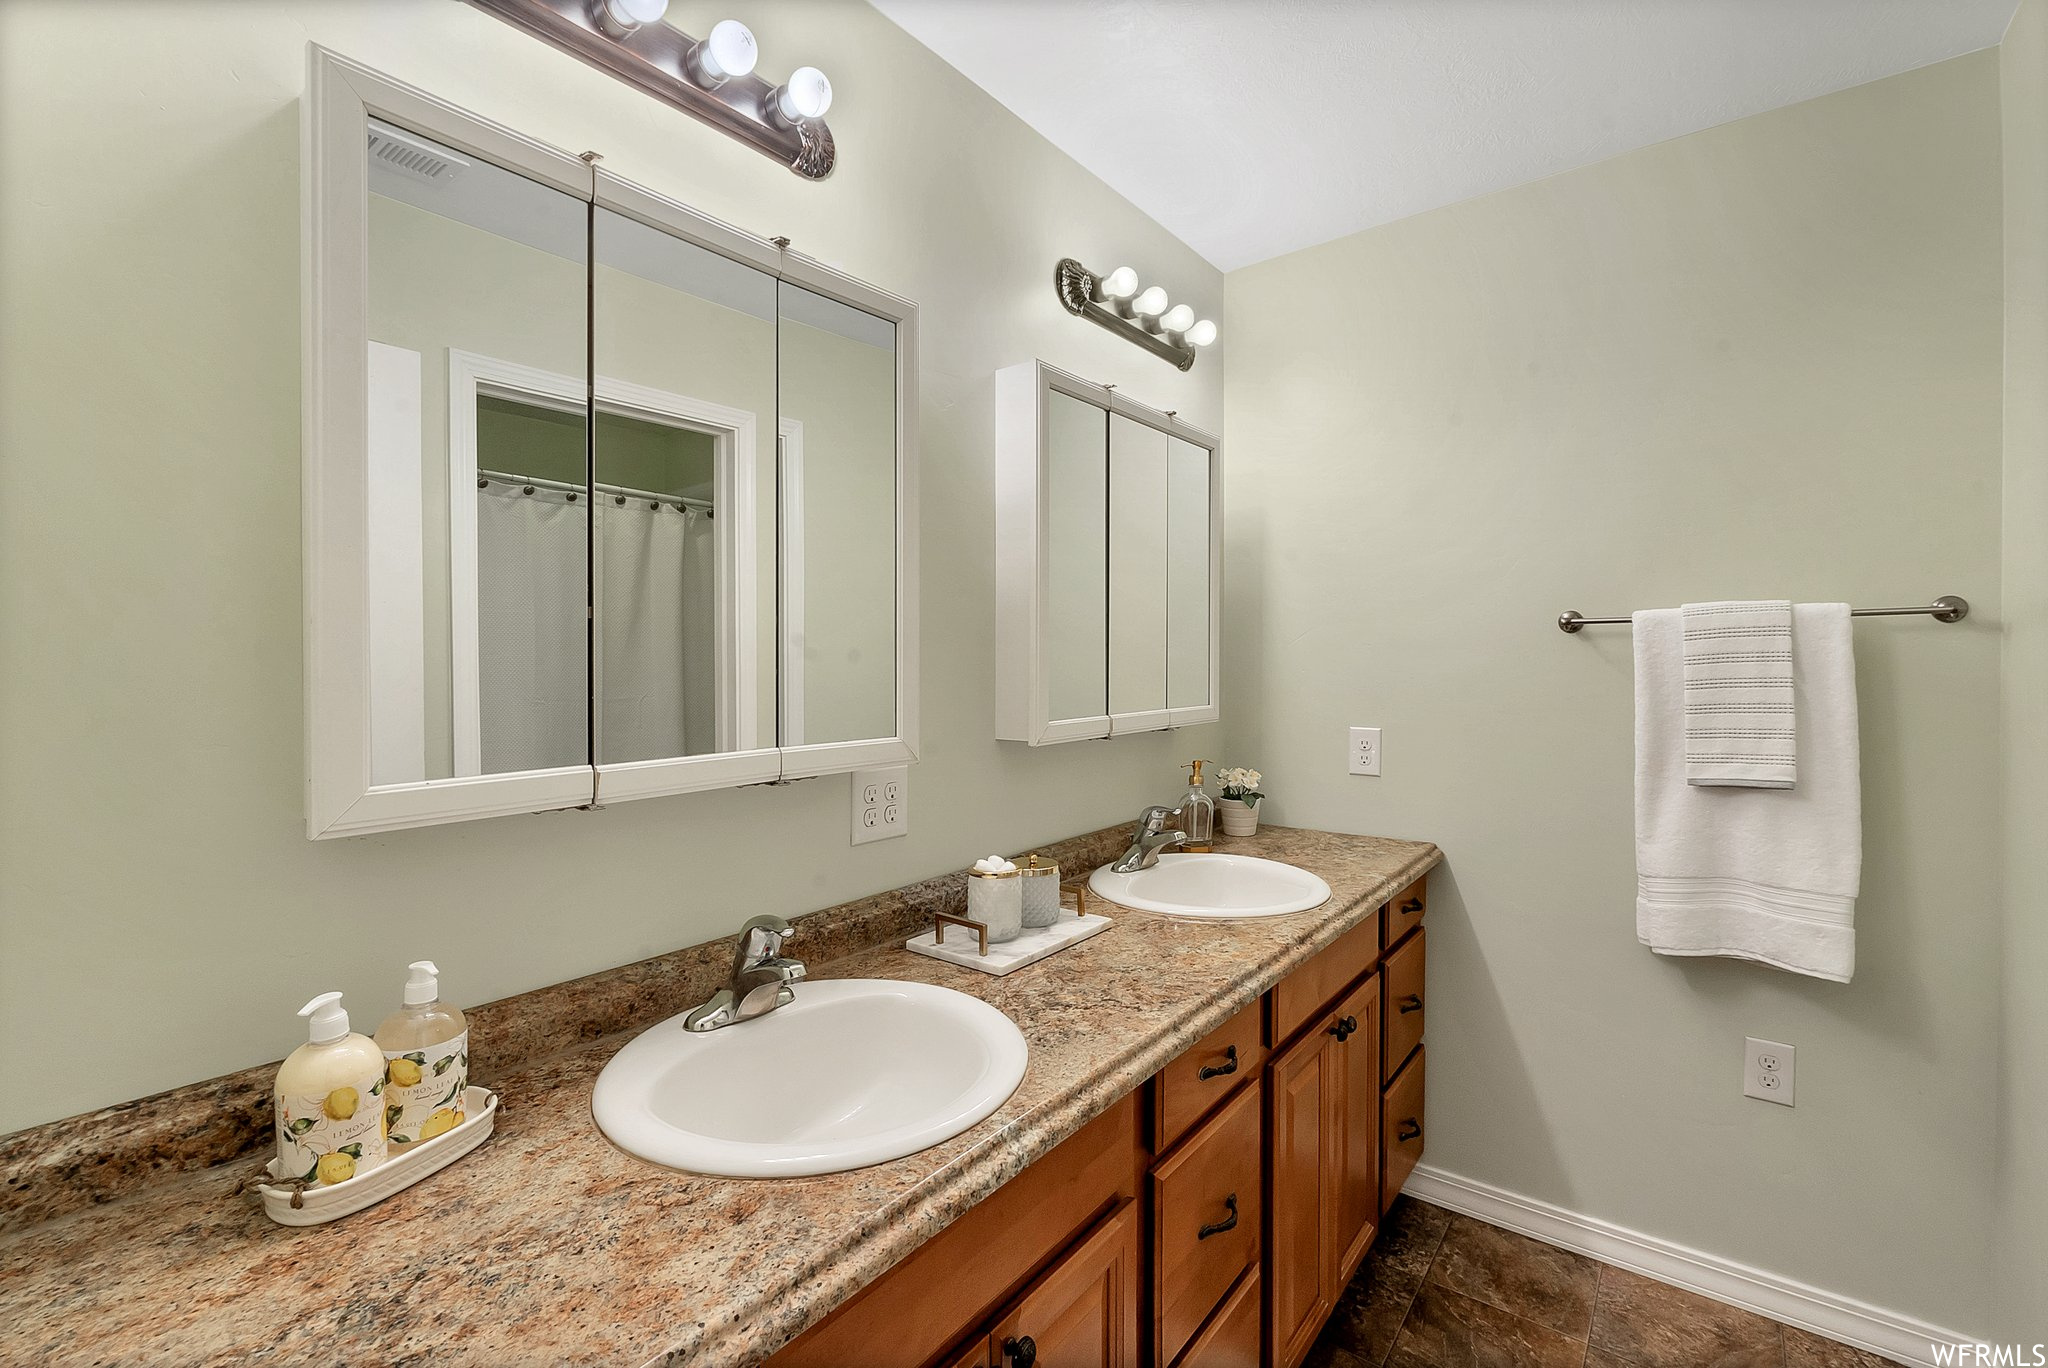 Bathroom featuring oversized vanity, double sink and storage space.